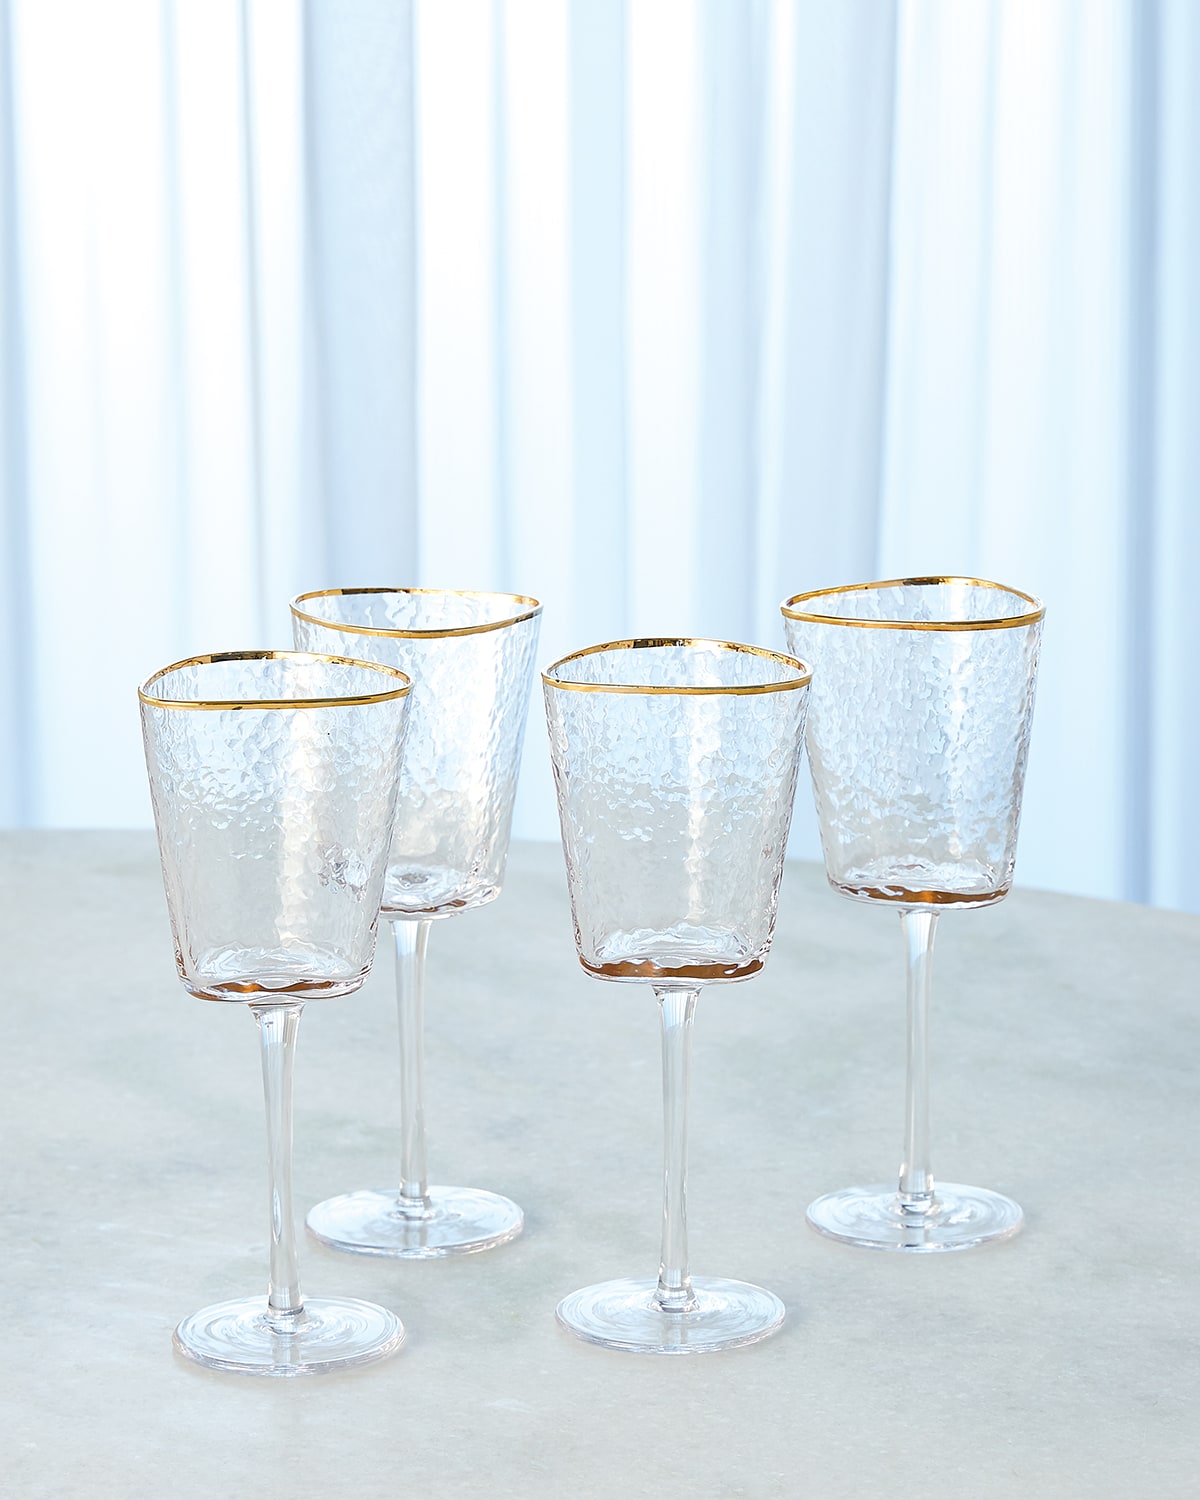 Footed Wine Glasses w/ Gold Rim, Set of 4